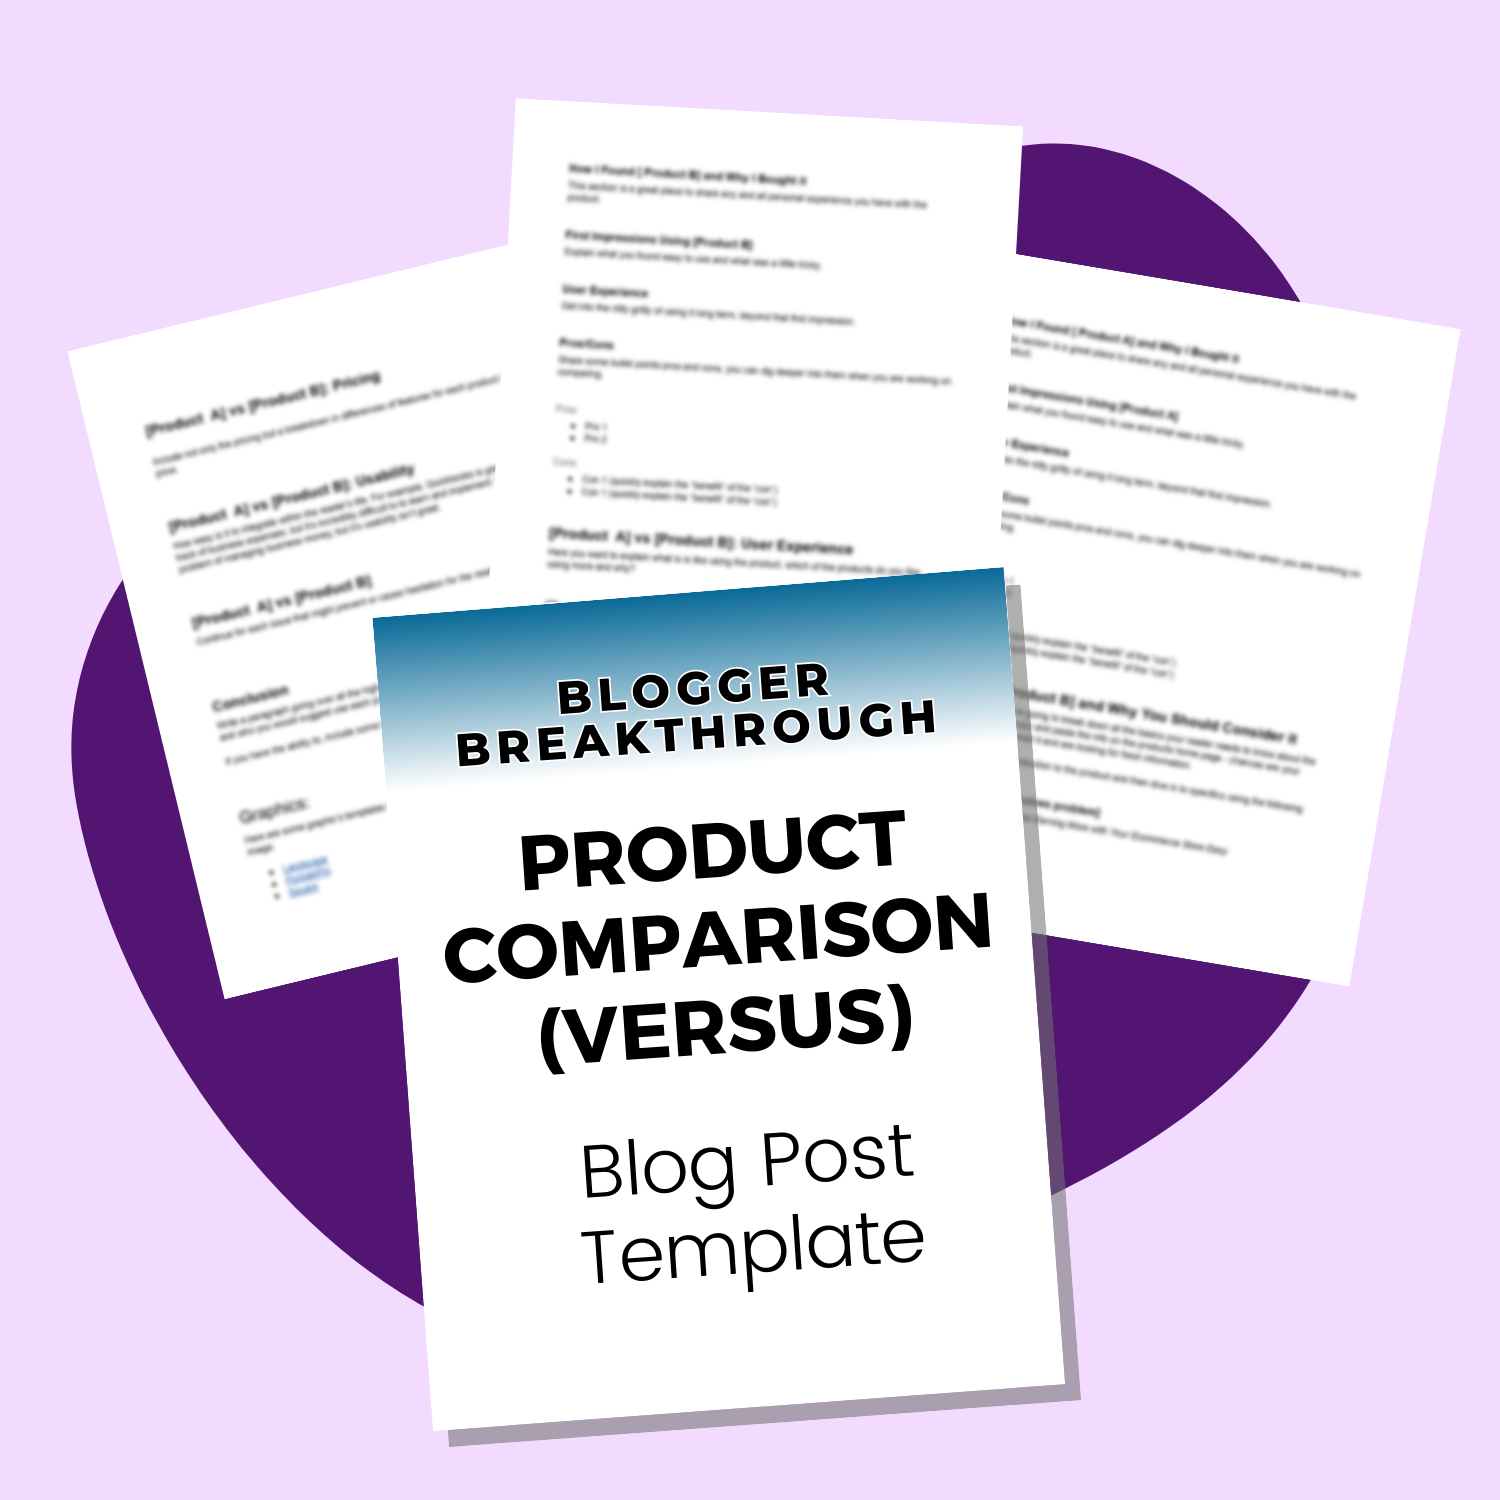 Digital Product Comparison Blog Post Template by Double Jacks Media displayed among other documents.